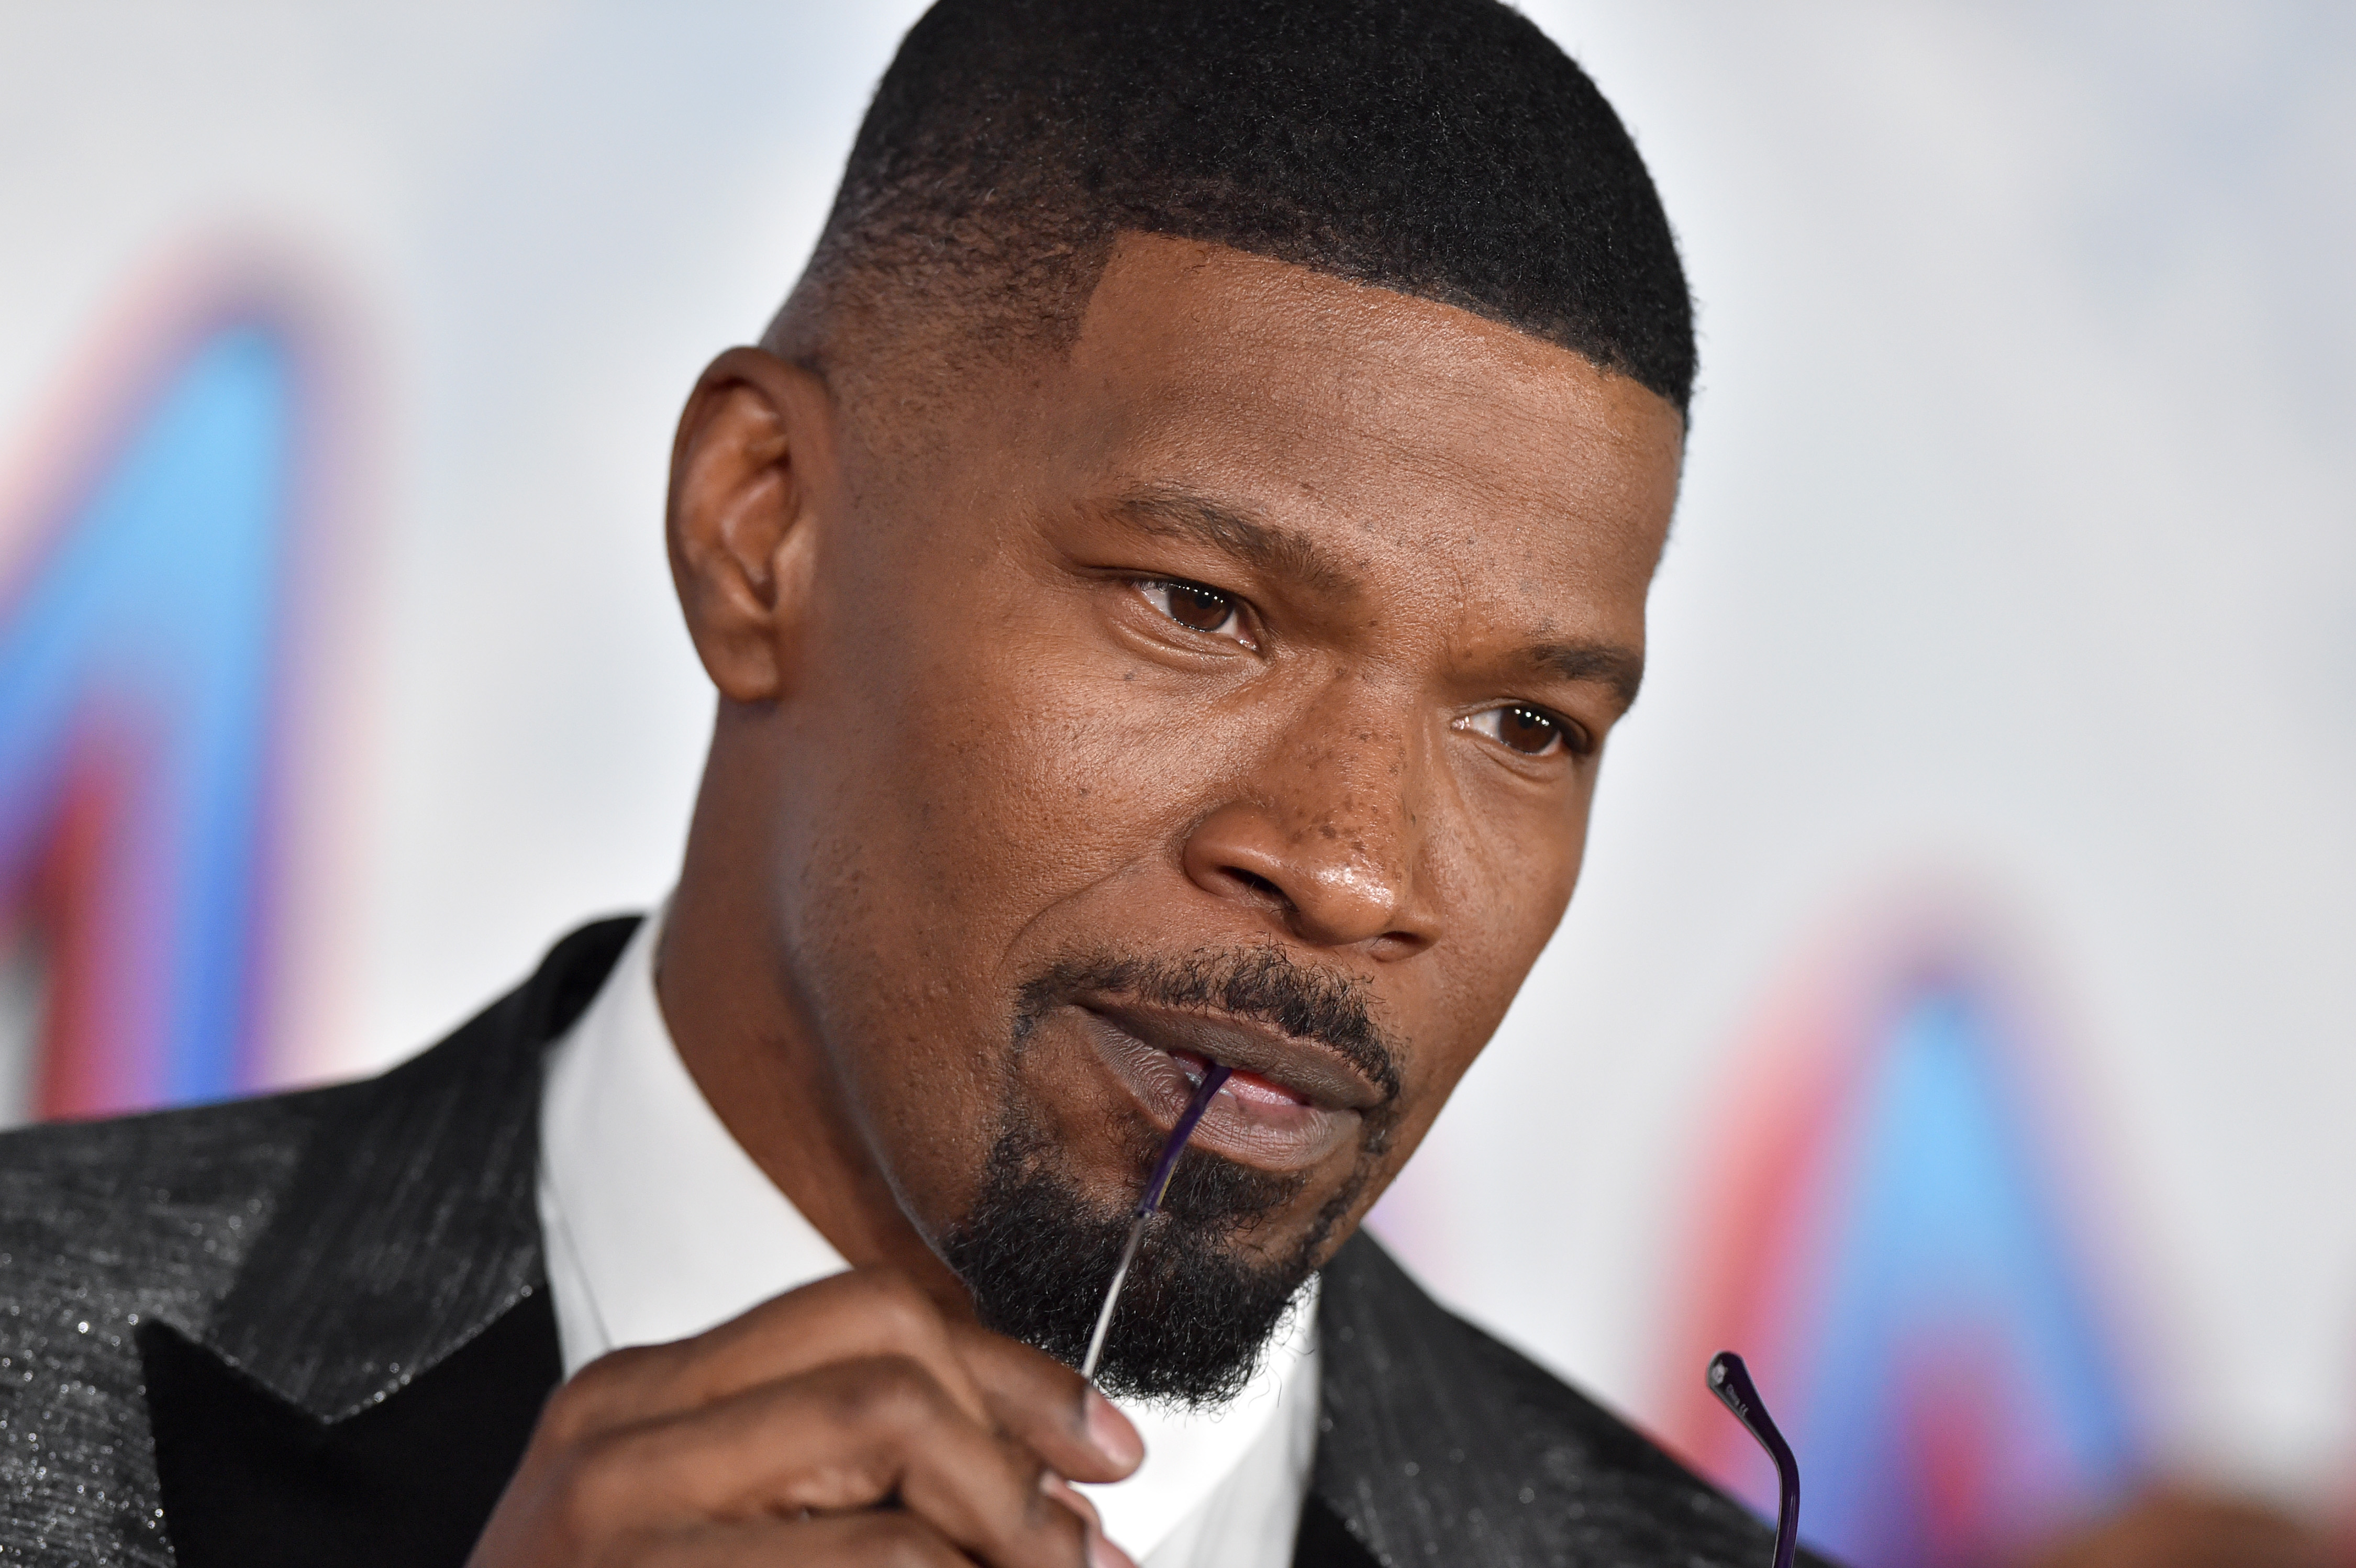 'Spider-Man: No Way Home' star Jamie Foxx wears a silver sparkly suit over a white button-up shirt and bites the end of his glasses that he's holding in his hand.